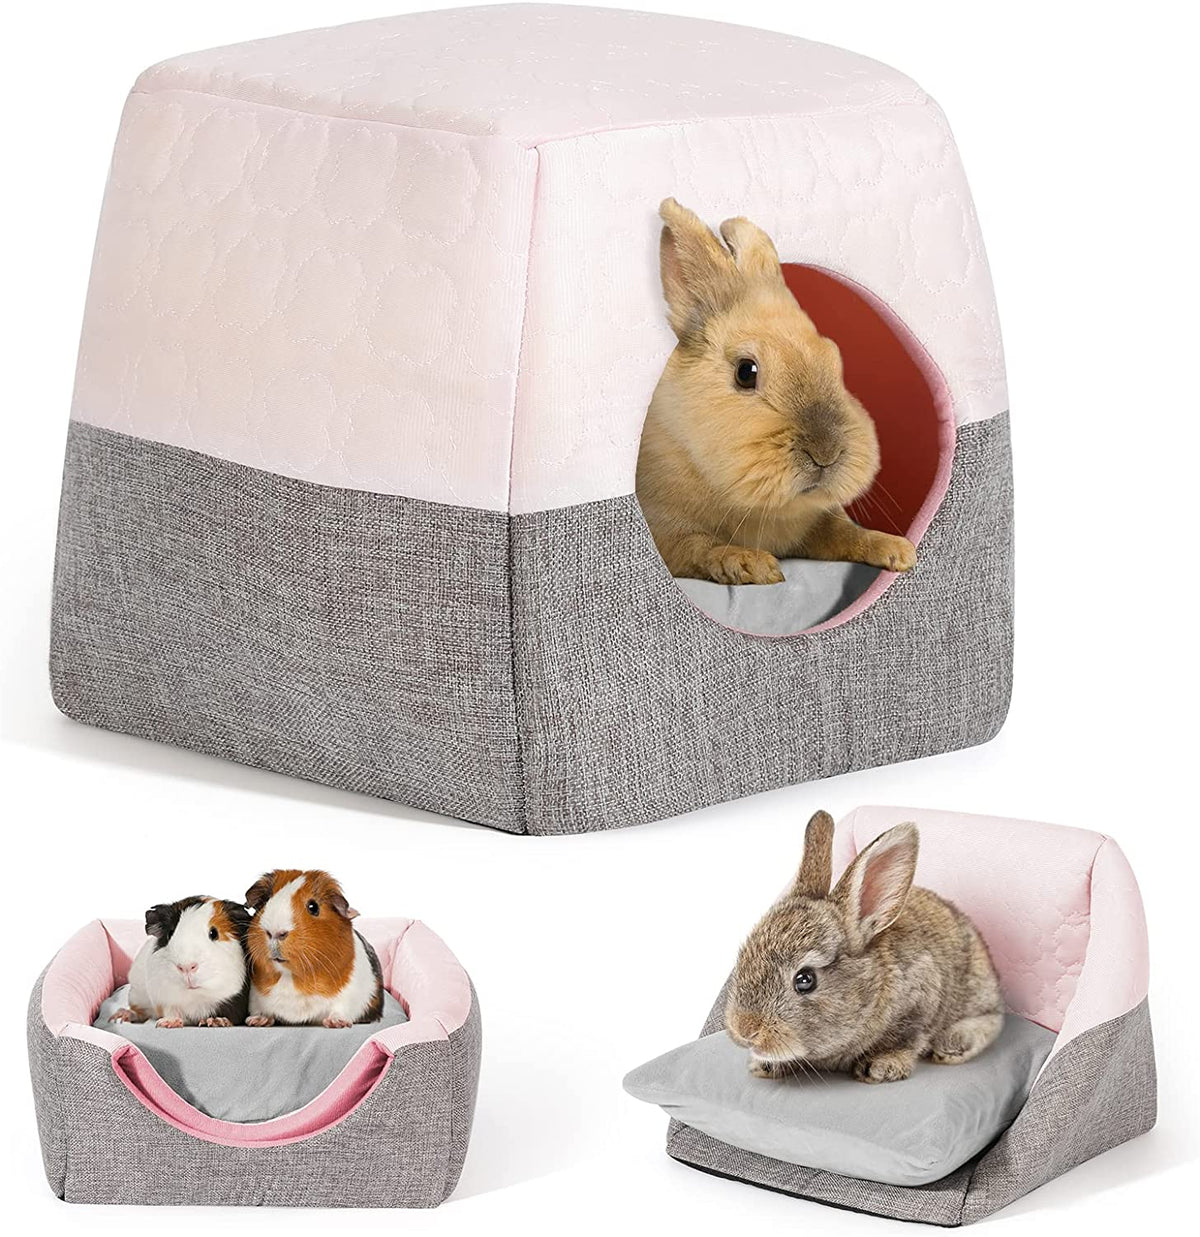 Foldable Guinea Pig Tent Bed